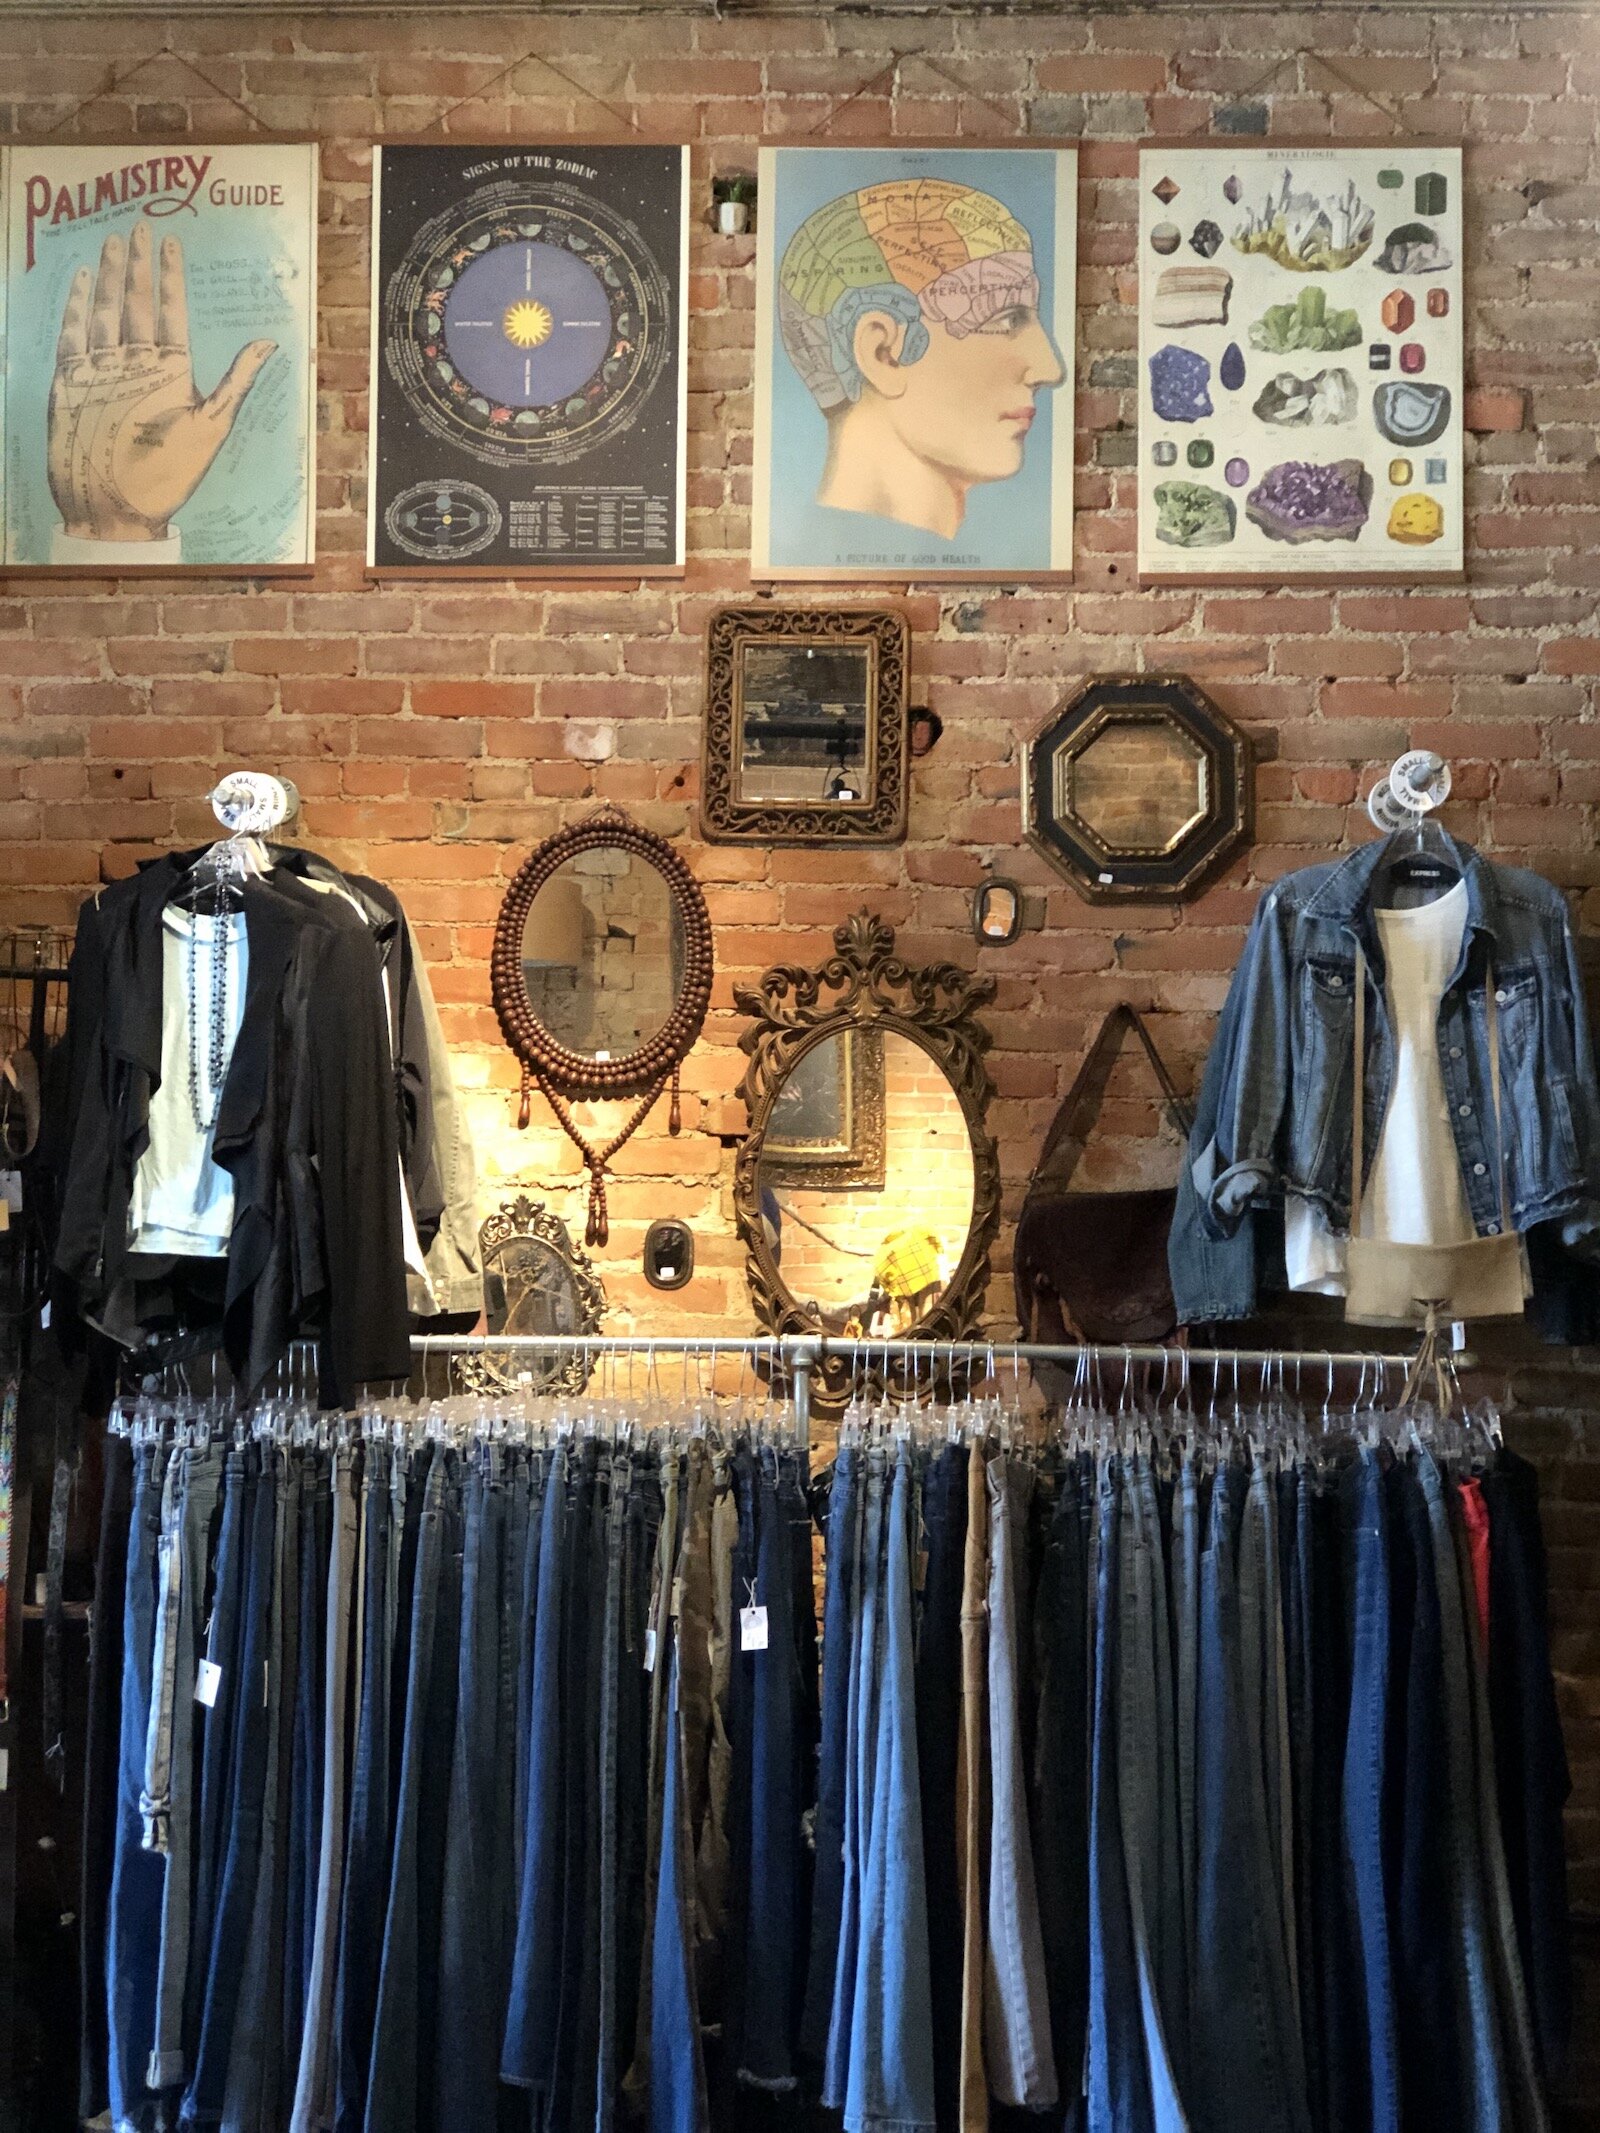 Bellazo offers vintage and modern recycled fashions.